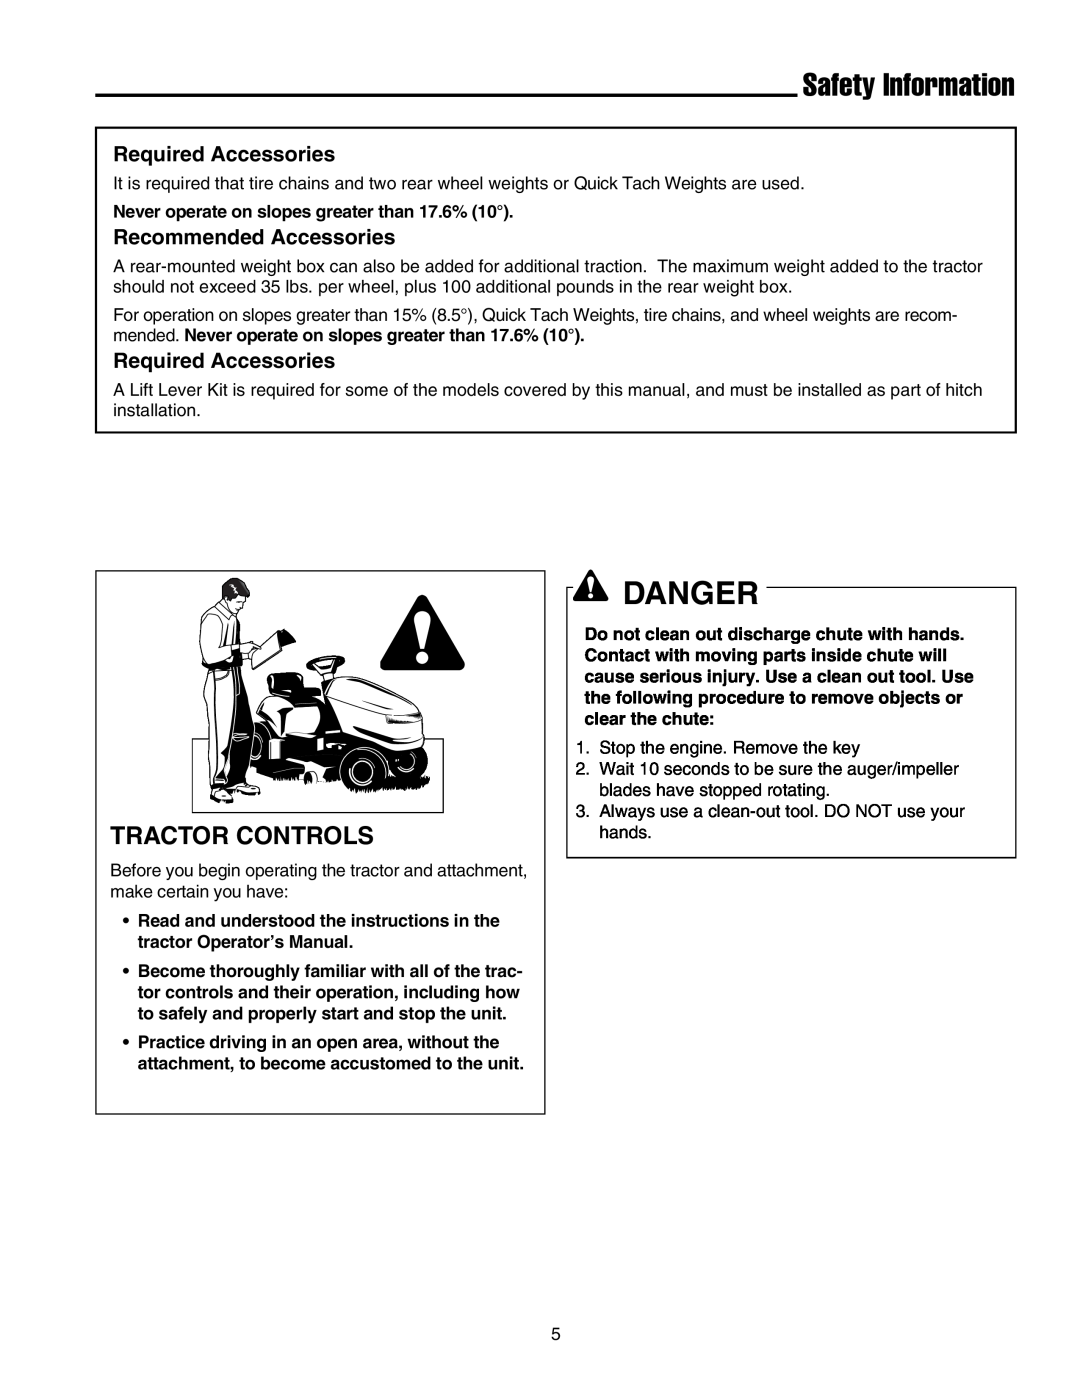 Massey Ferguson L&G 1694404 Safety Information, Tractor Controls, Required Accessories, Recommended Accessories, Danger 